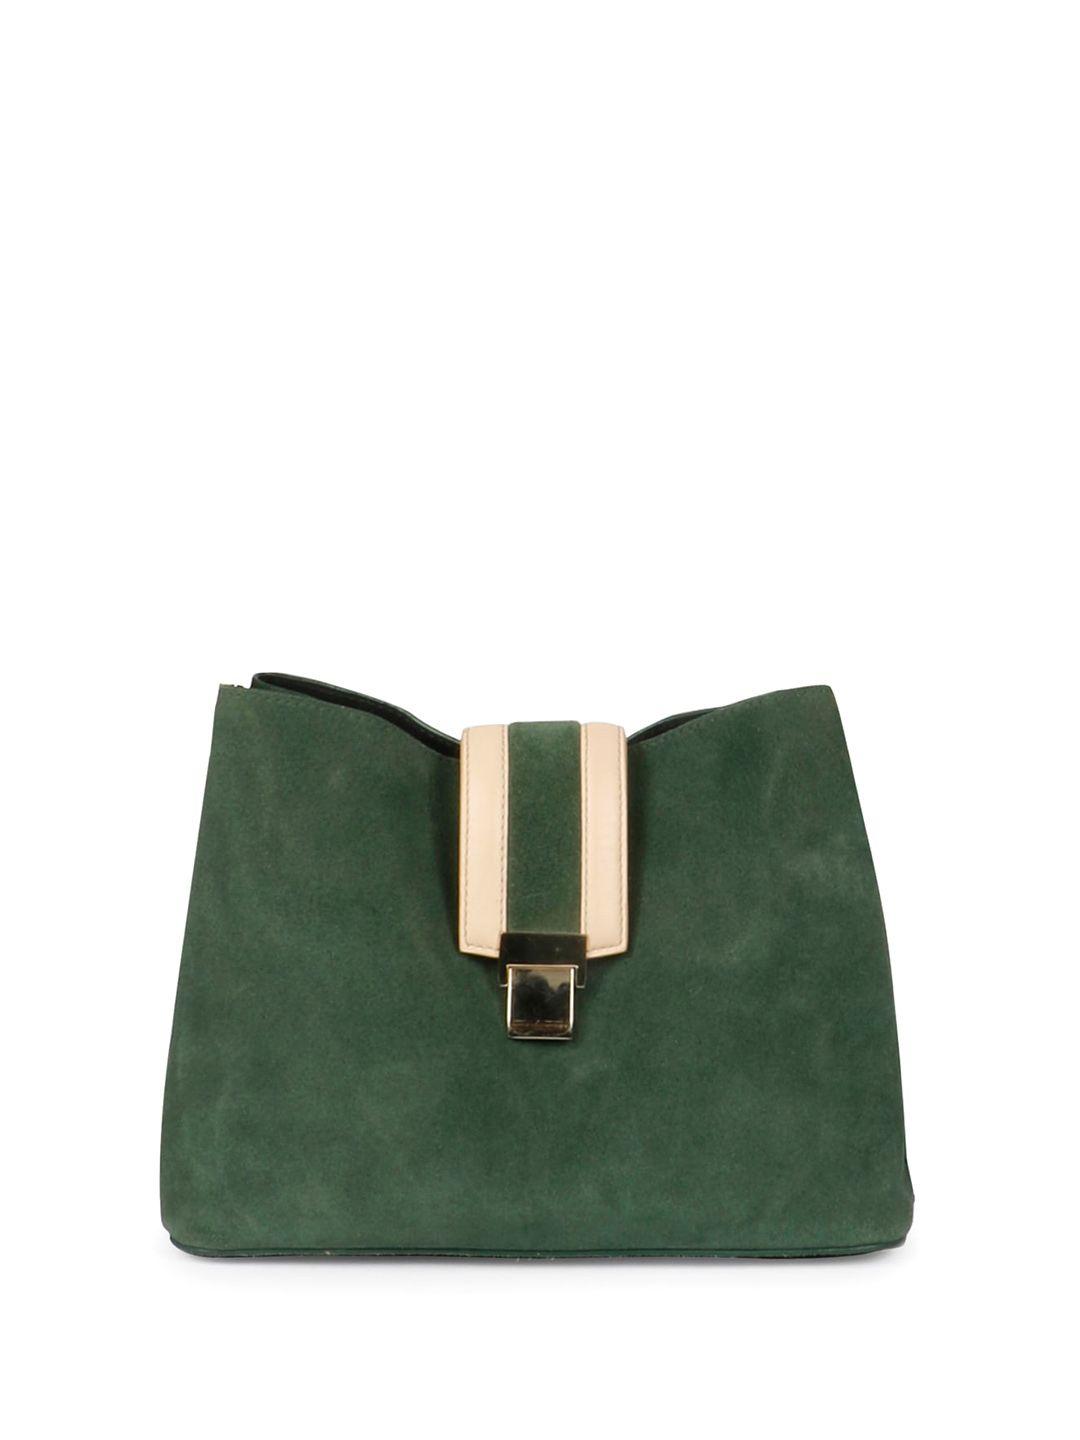 Favore Suede Leather Structured Sling Bag